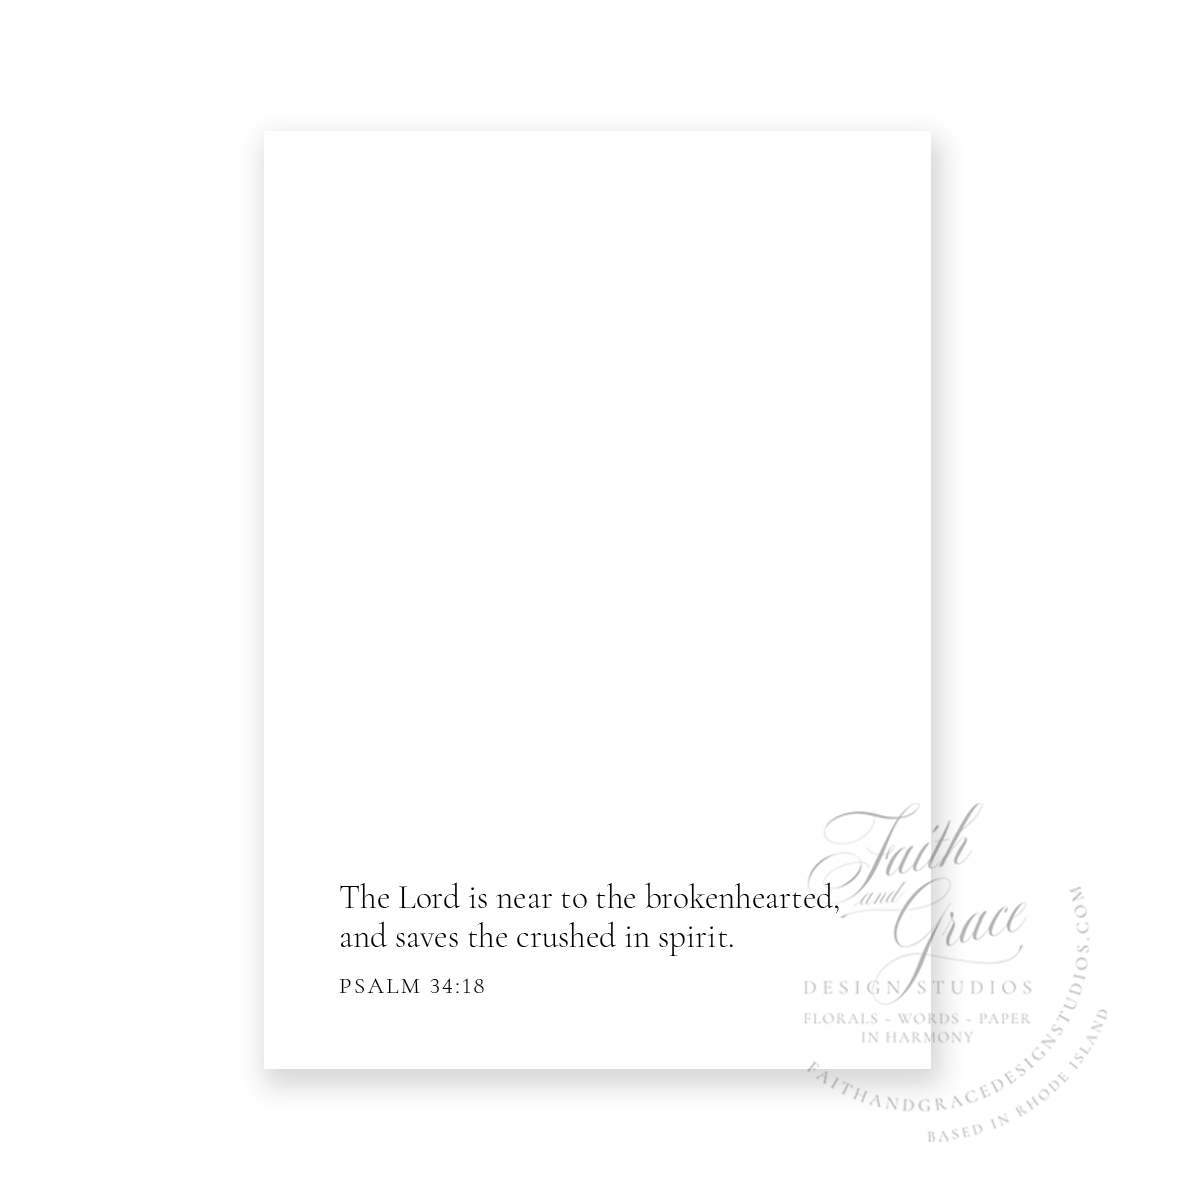 I'm Sharing in Your Sadness Religious Sympathy Card